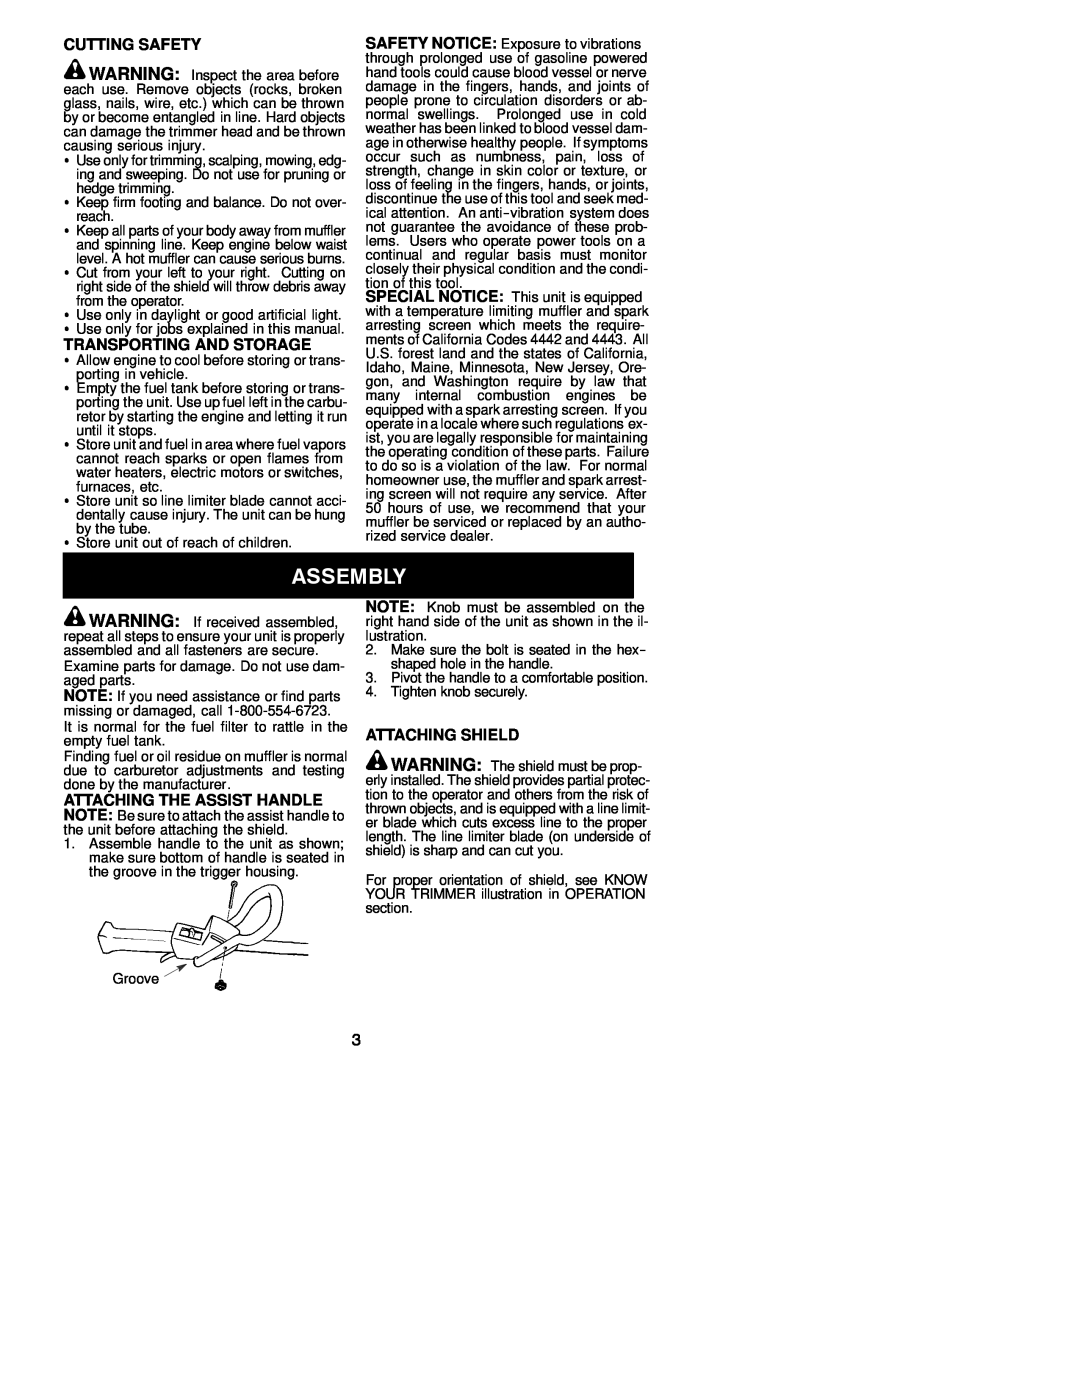 Weed Eater 530086934 instruction manual Cutting Safety, Transporting And Storage, Attaching Shield 